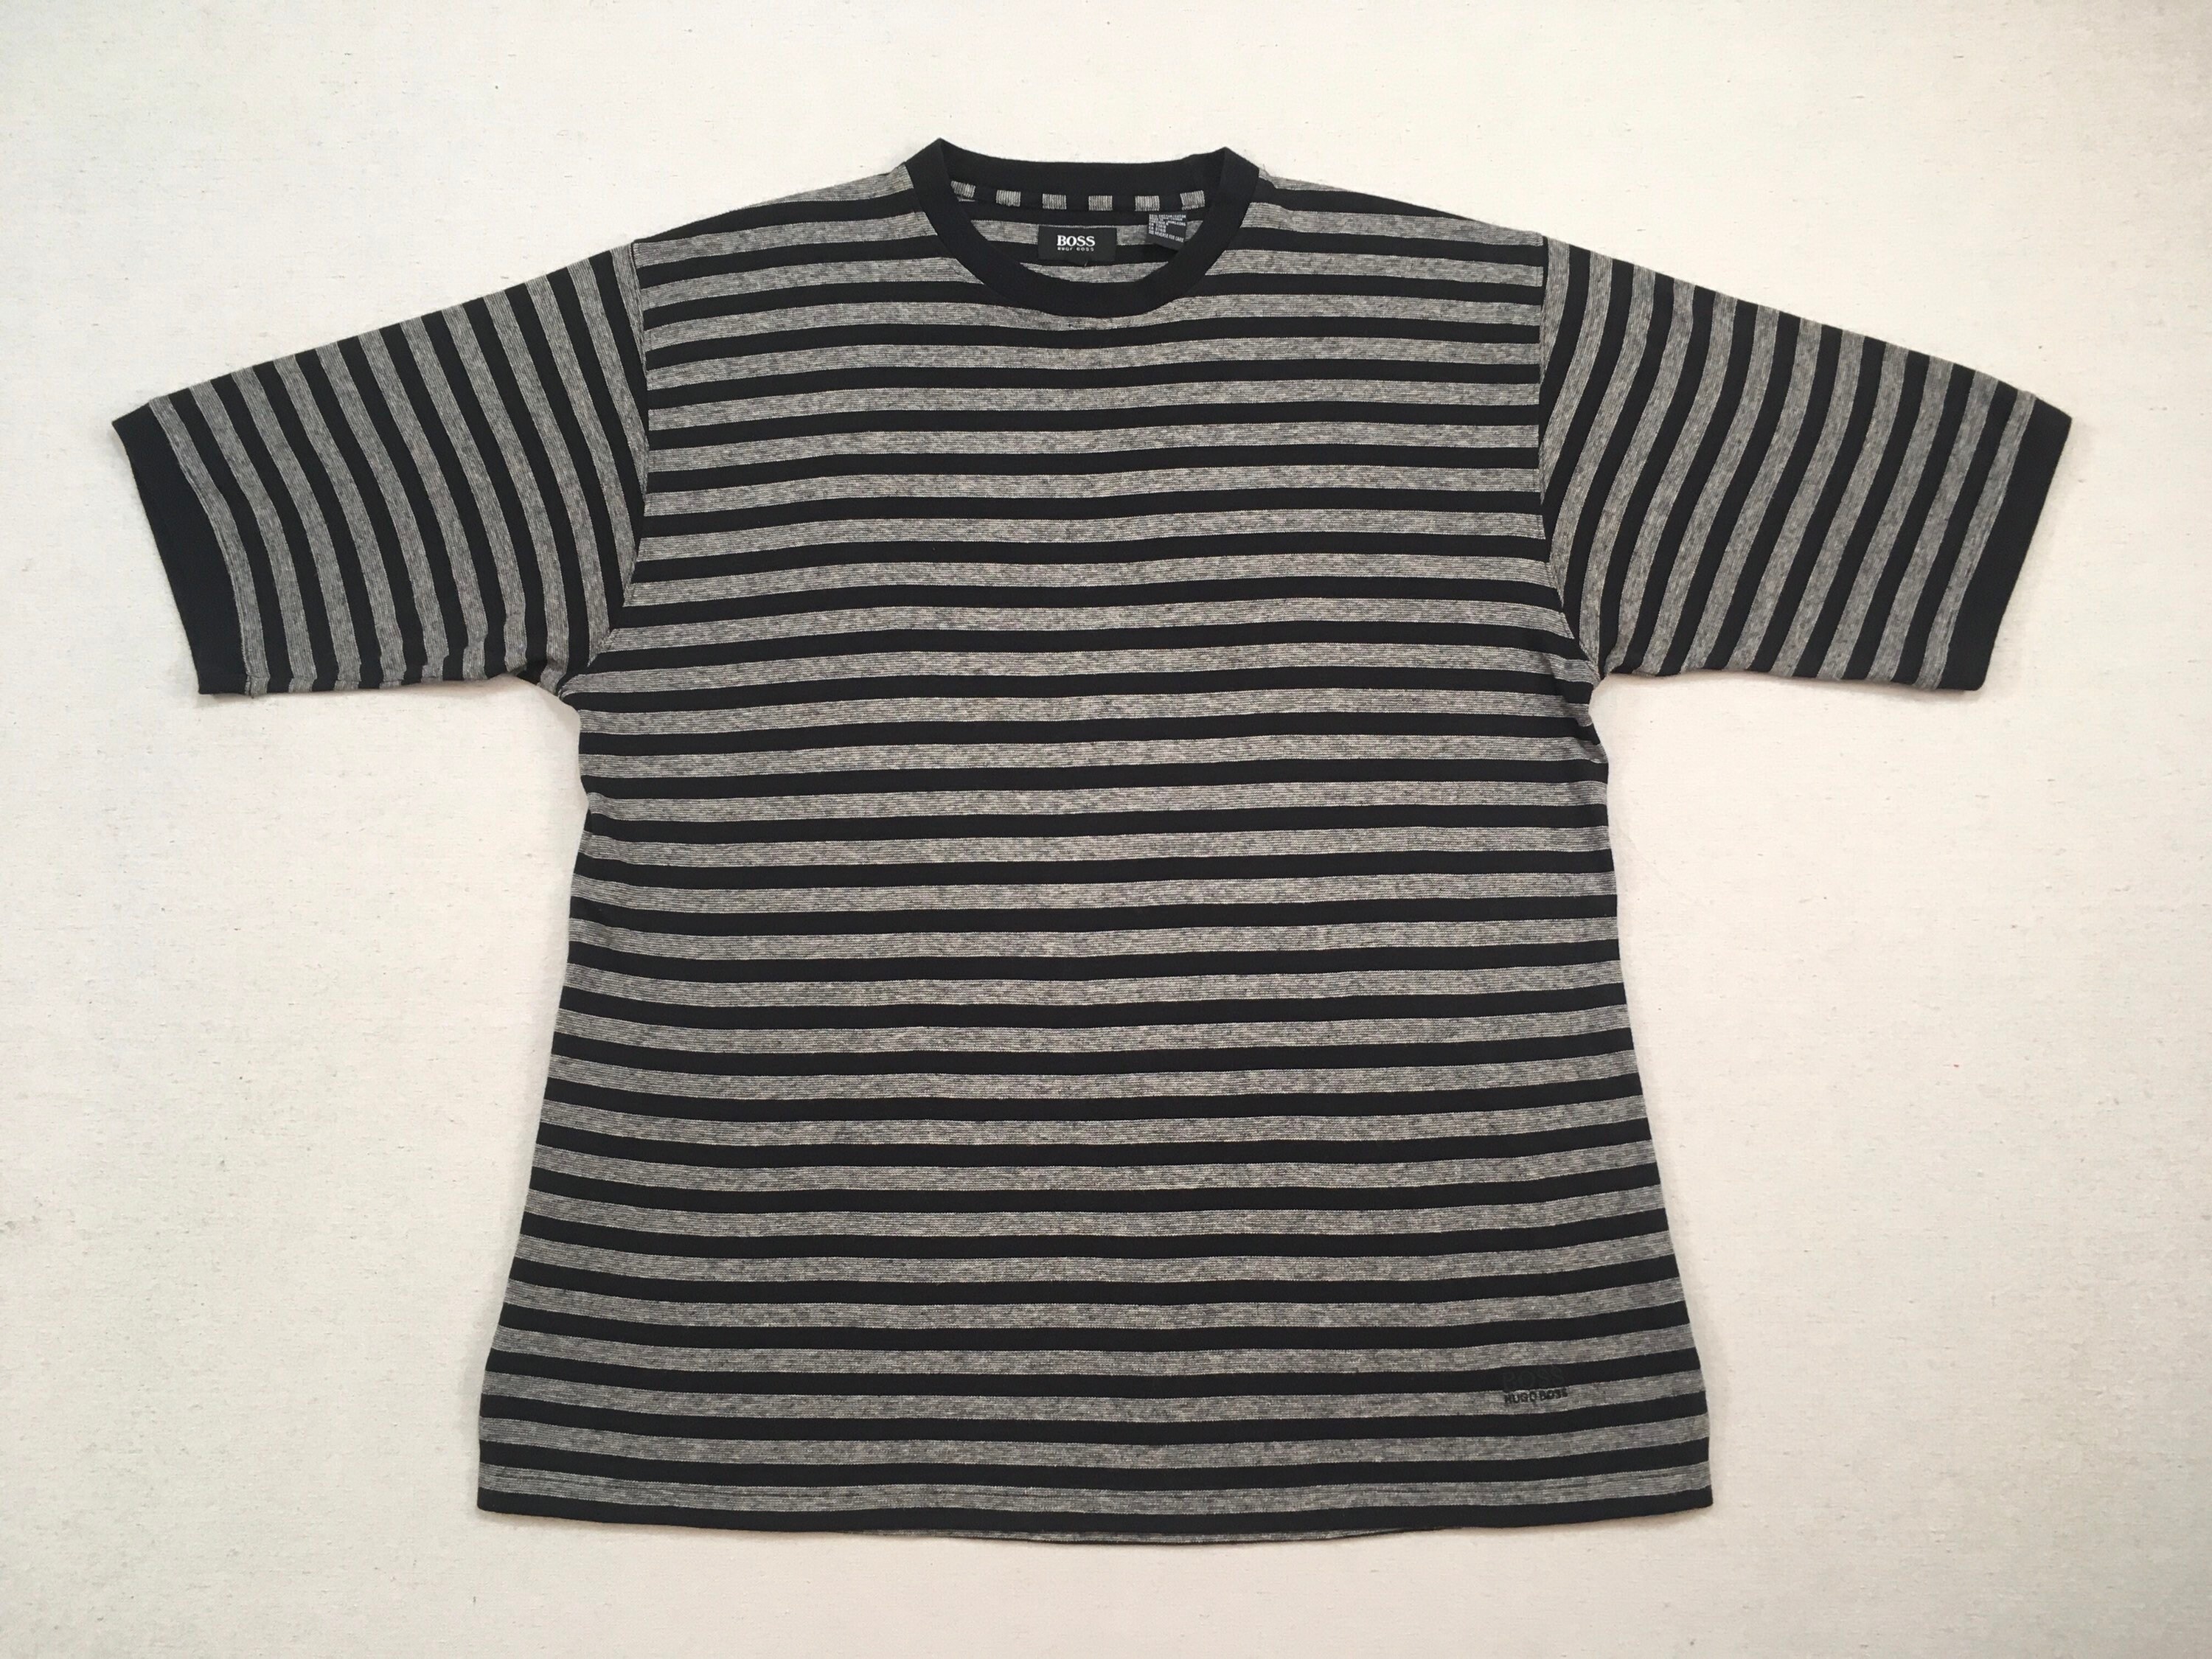 1990's, Cotton/Linen Blend, Oversized Tee, in Blck With Heathered Gray Stripes, By Hugo Boss